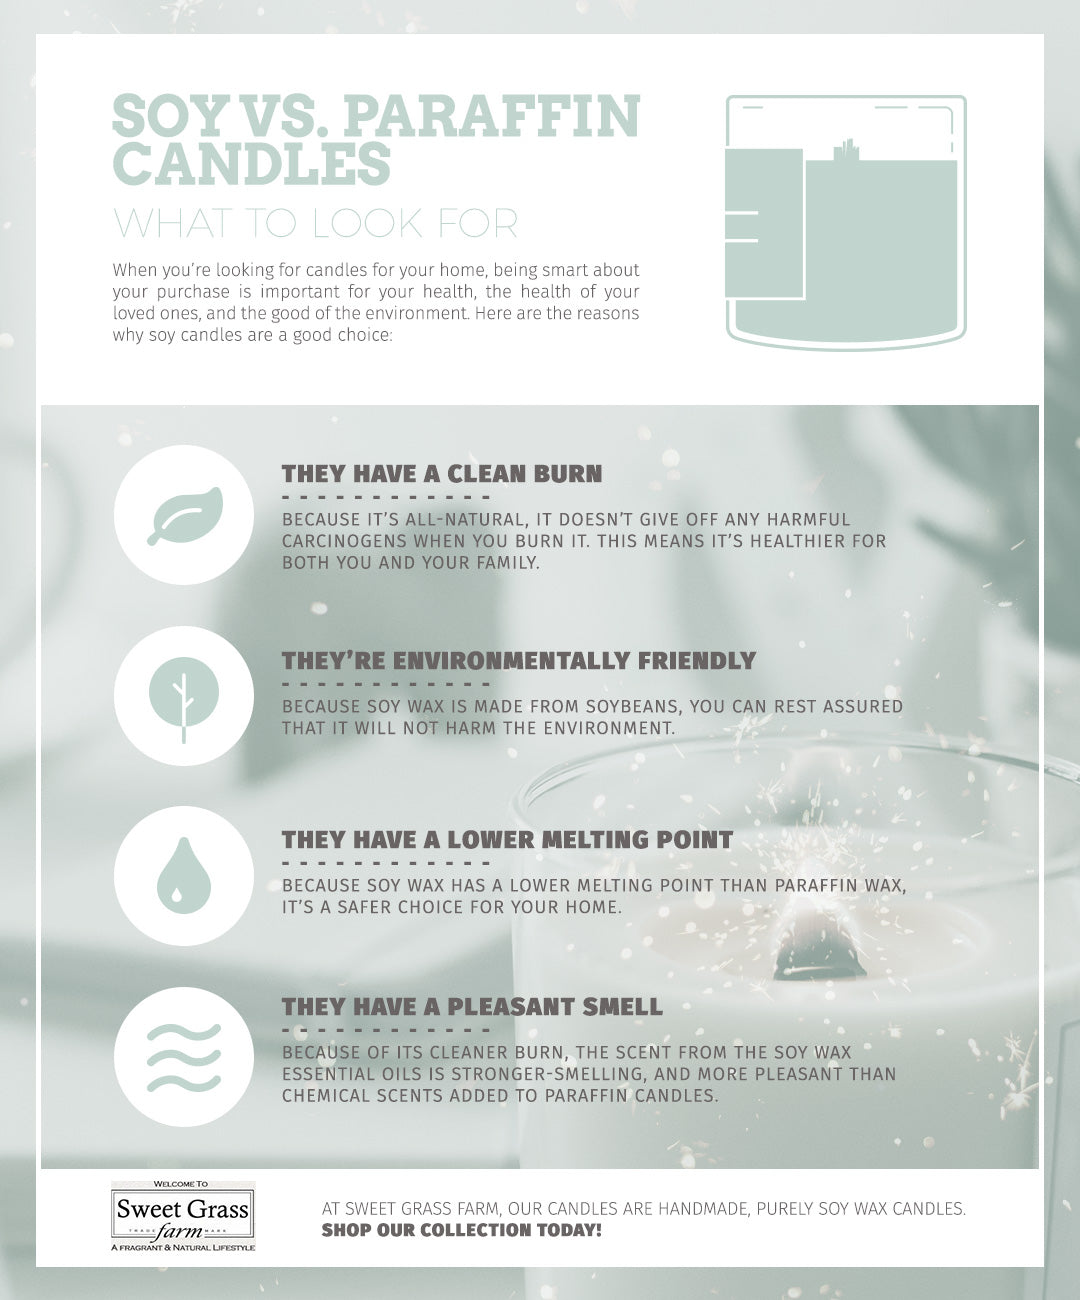 The Difference Between Soy Wax and Paraffin Wax Candles